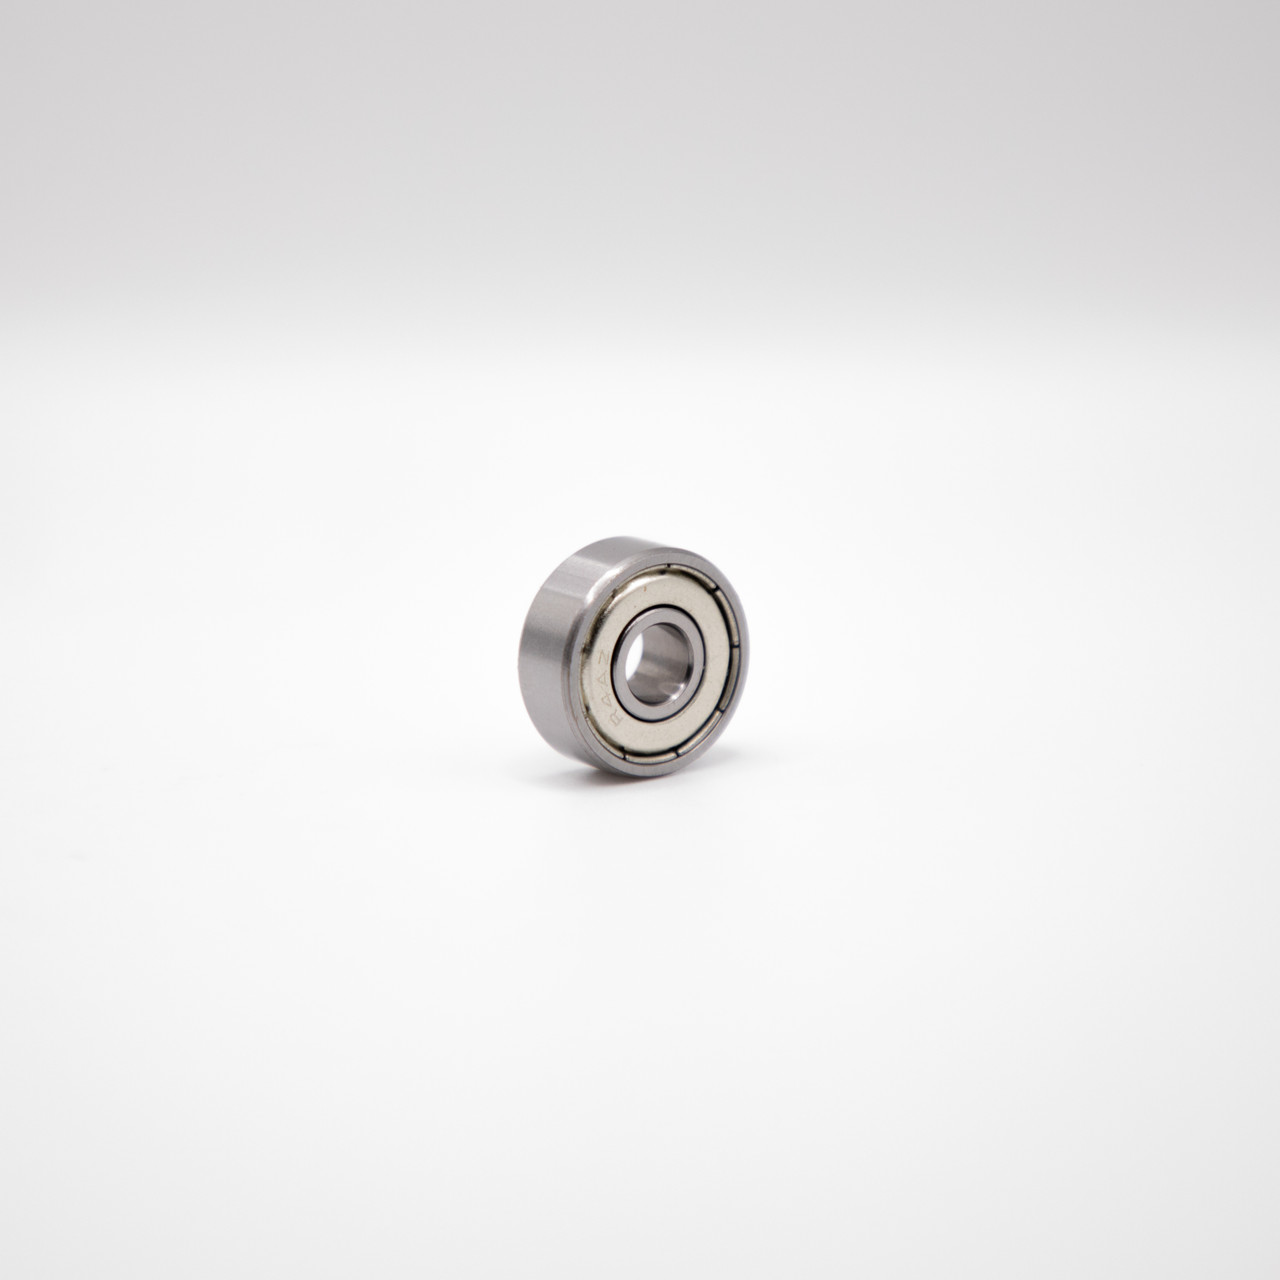 S606-ZZ Stainless Steel Miniature Ball Bearing 6x17x6 Front View